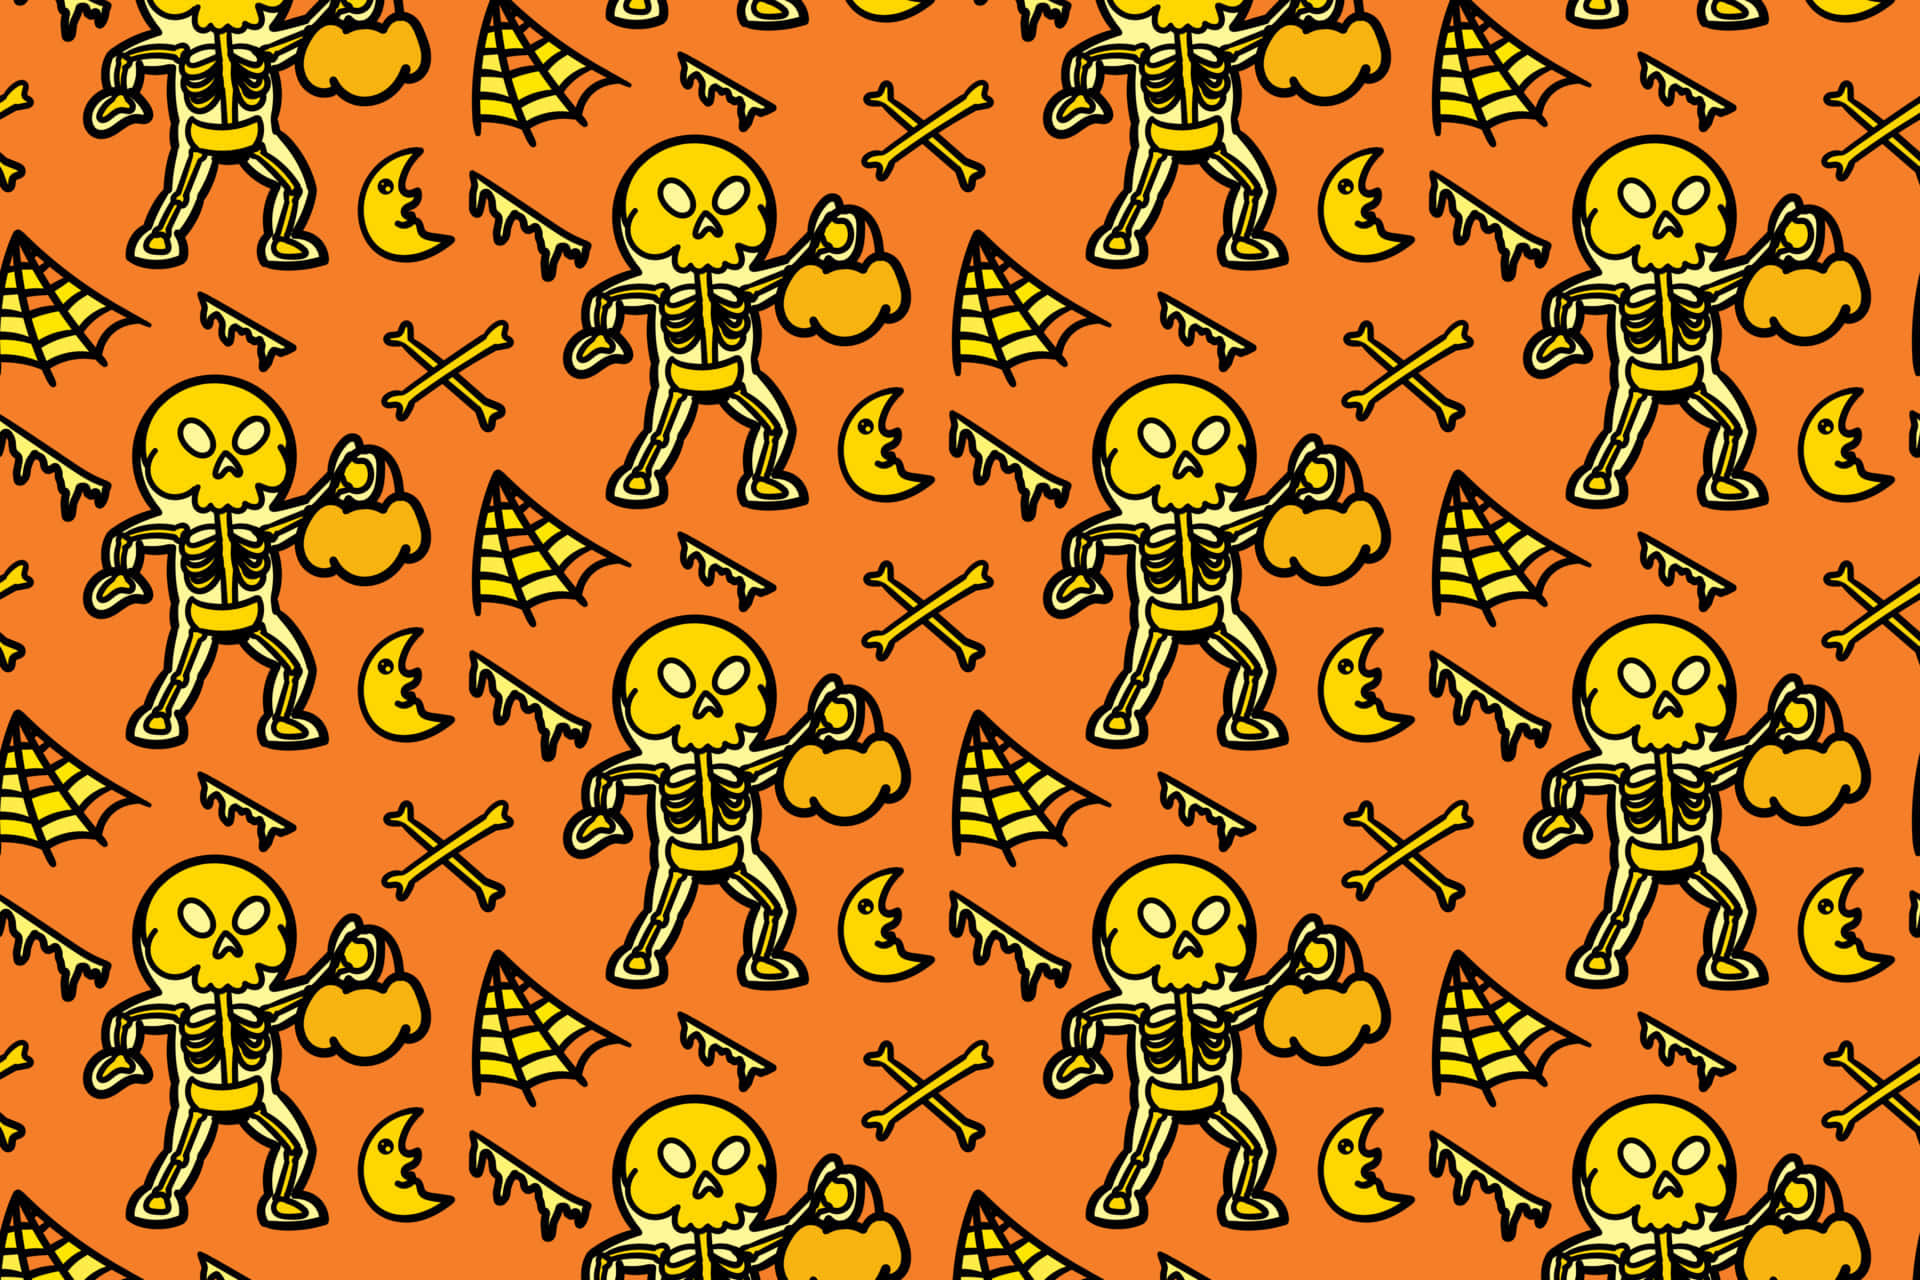 Stay undead this Halloween in spectacular skeleton costumes! Wallpaper